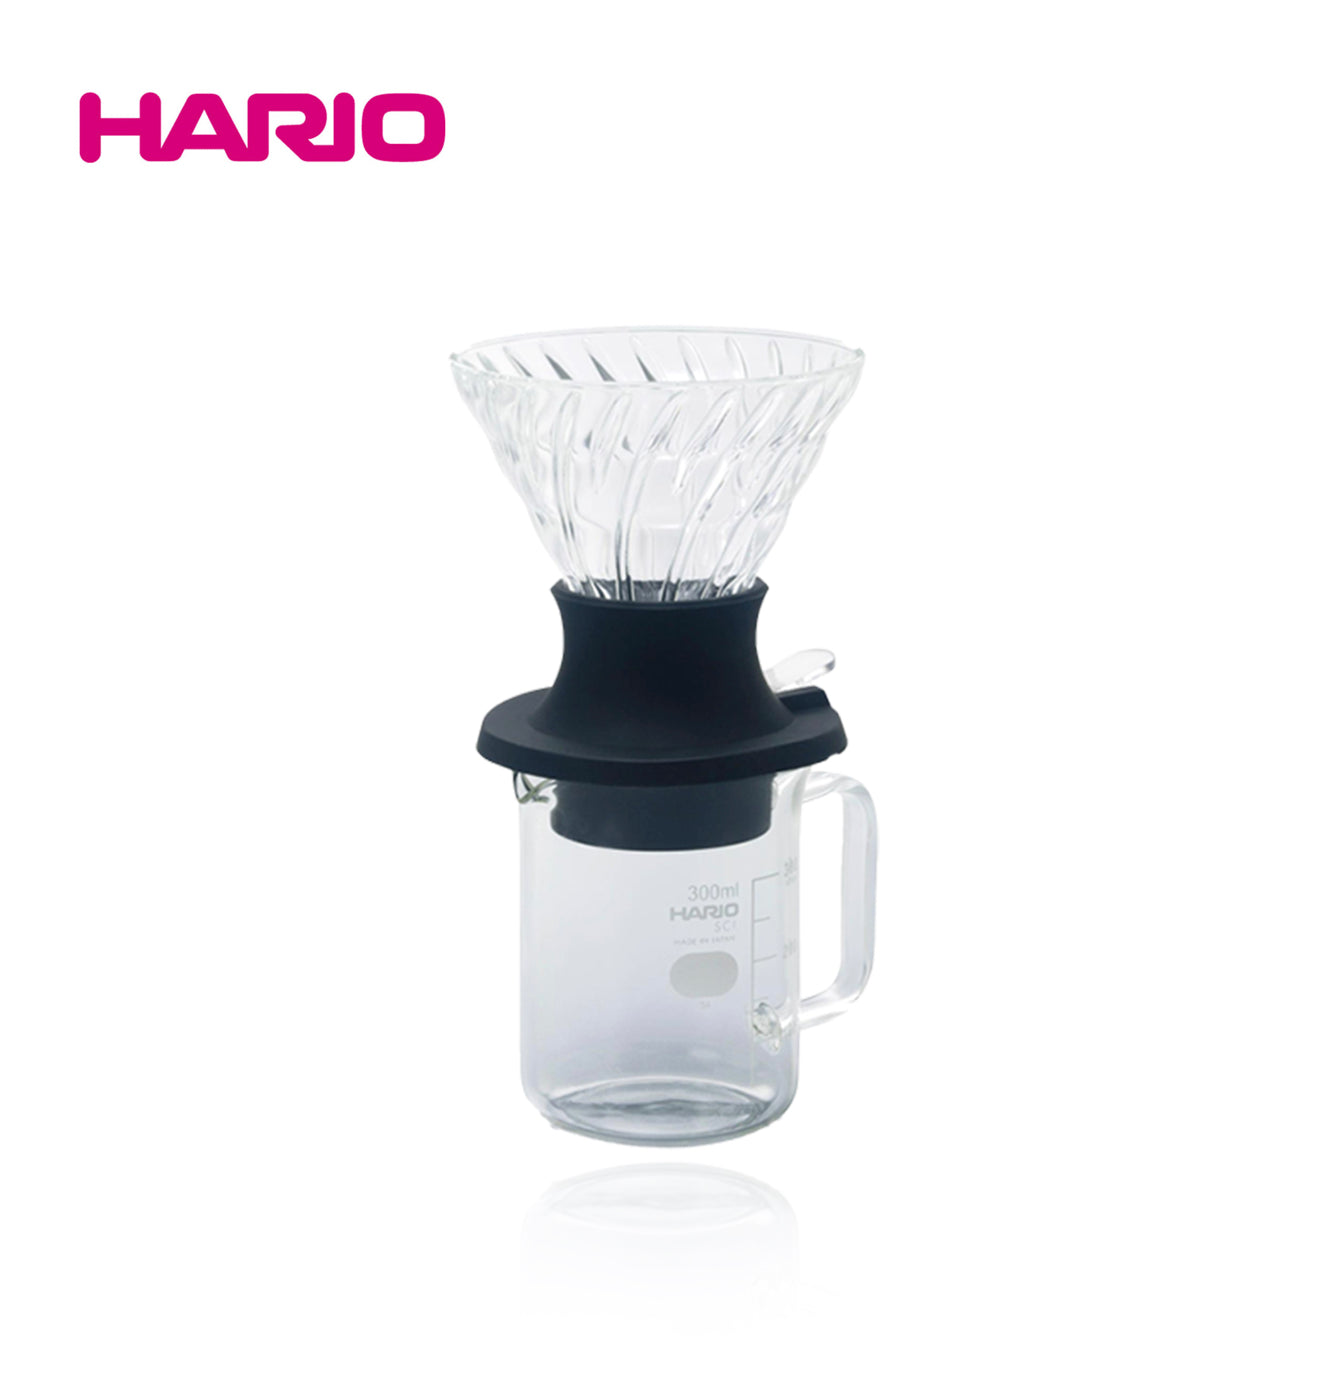 Hario V60 Immersion Switch Dripper set